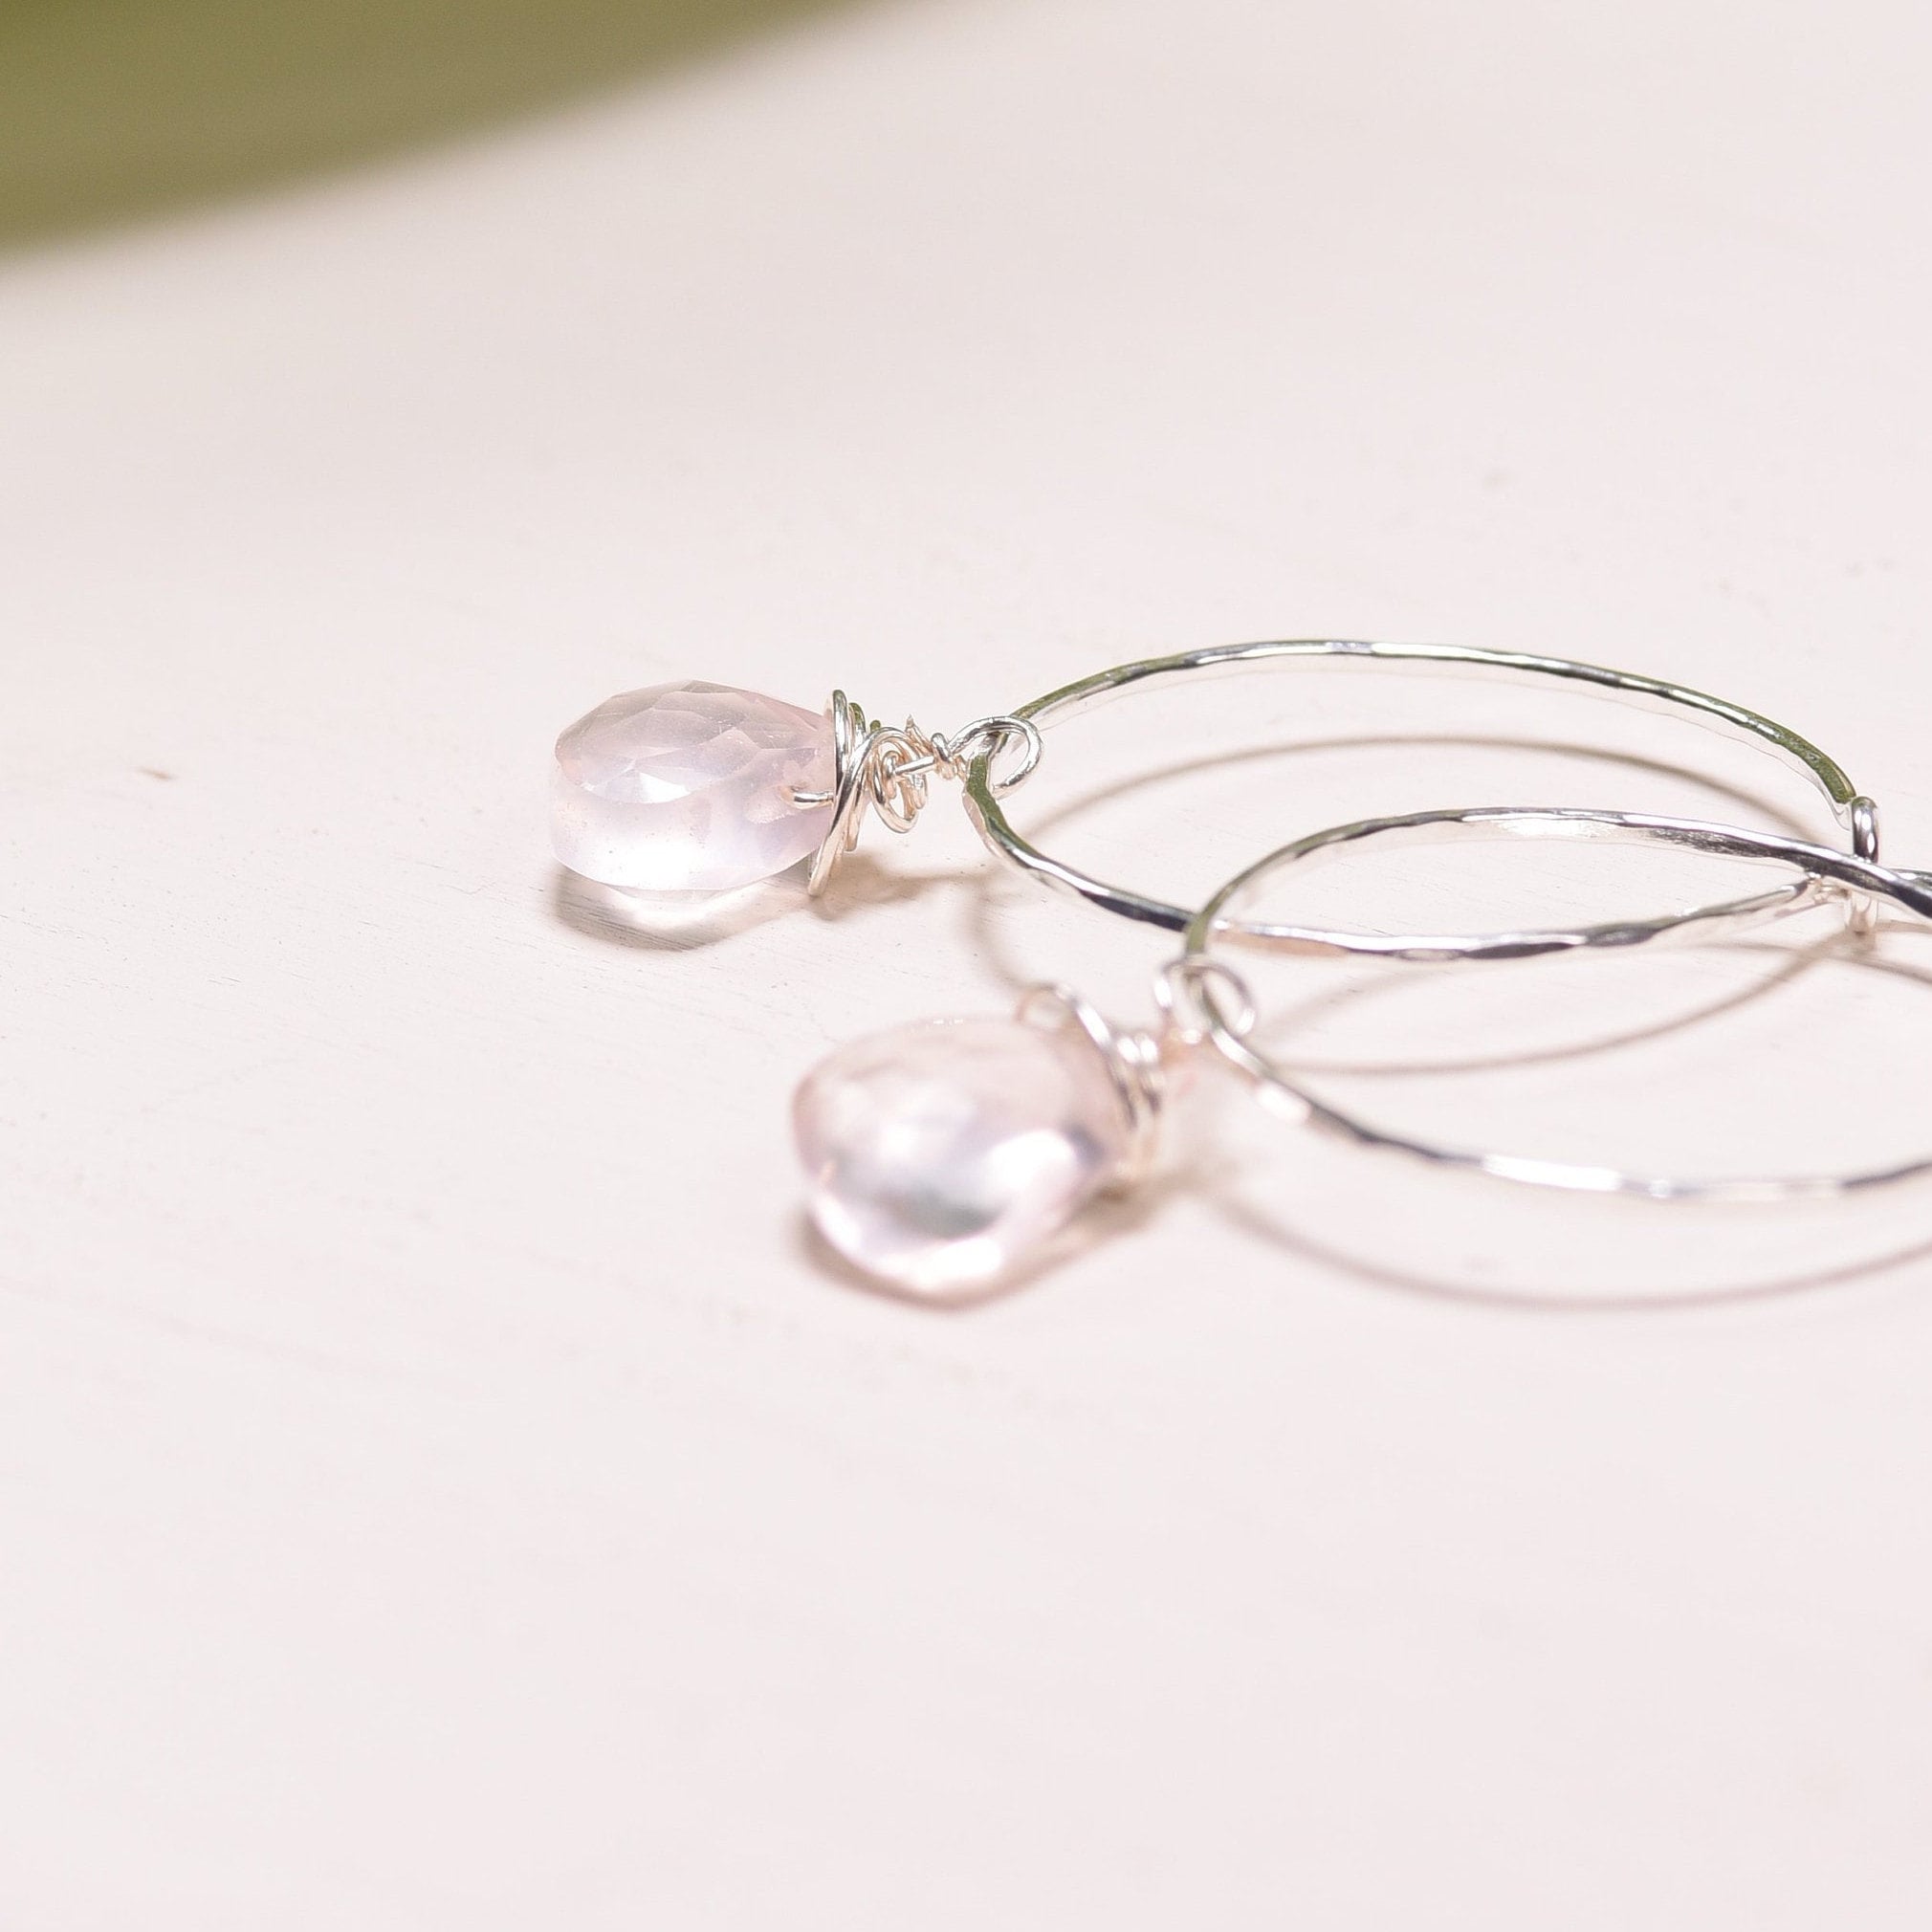 Sterling Silver Spiral Earrings with Rose Quartz Briolettes